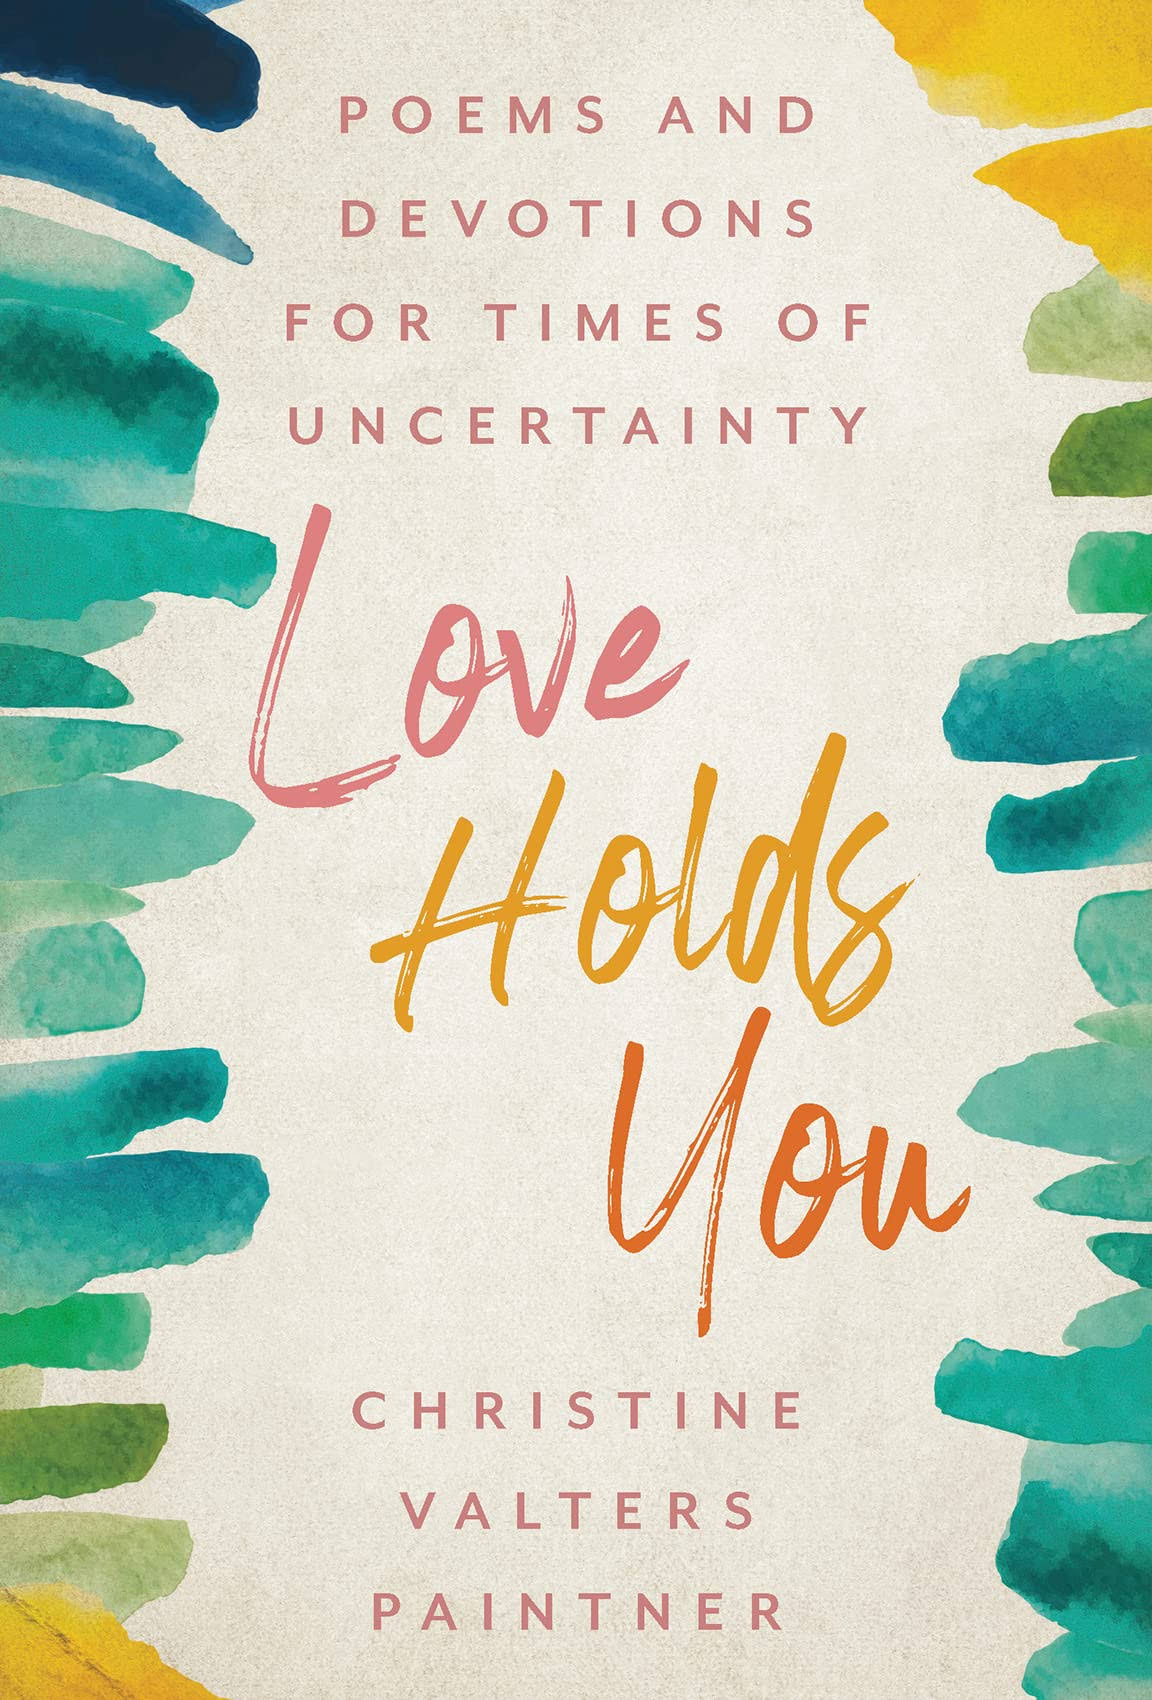 Love Holds You: Poems and Devotions for Times of Uncertainty [Book]